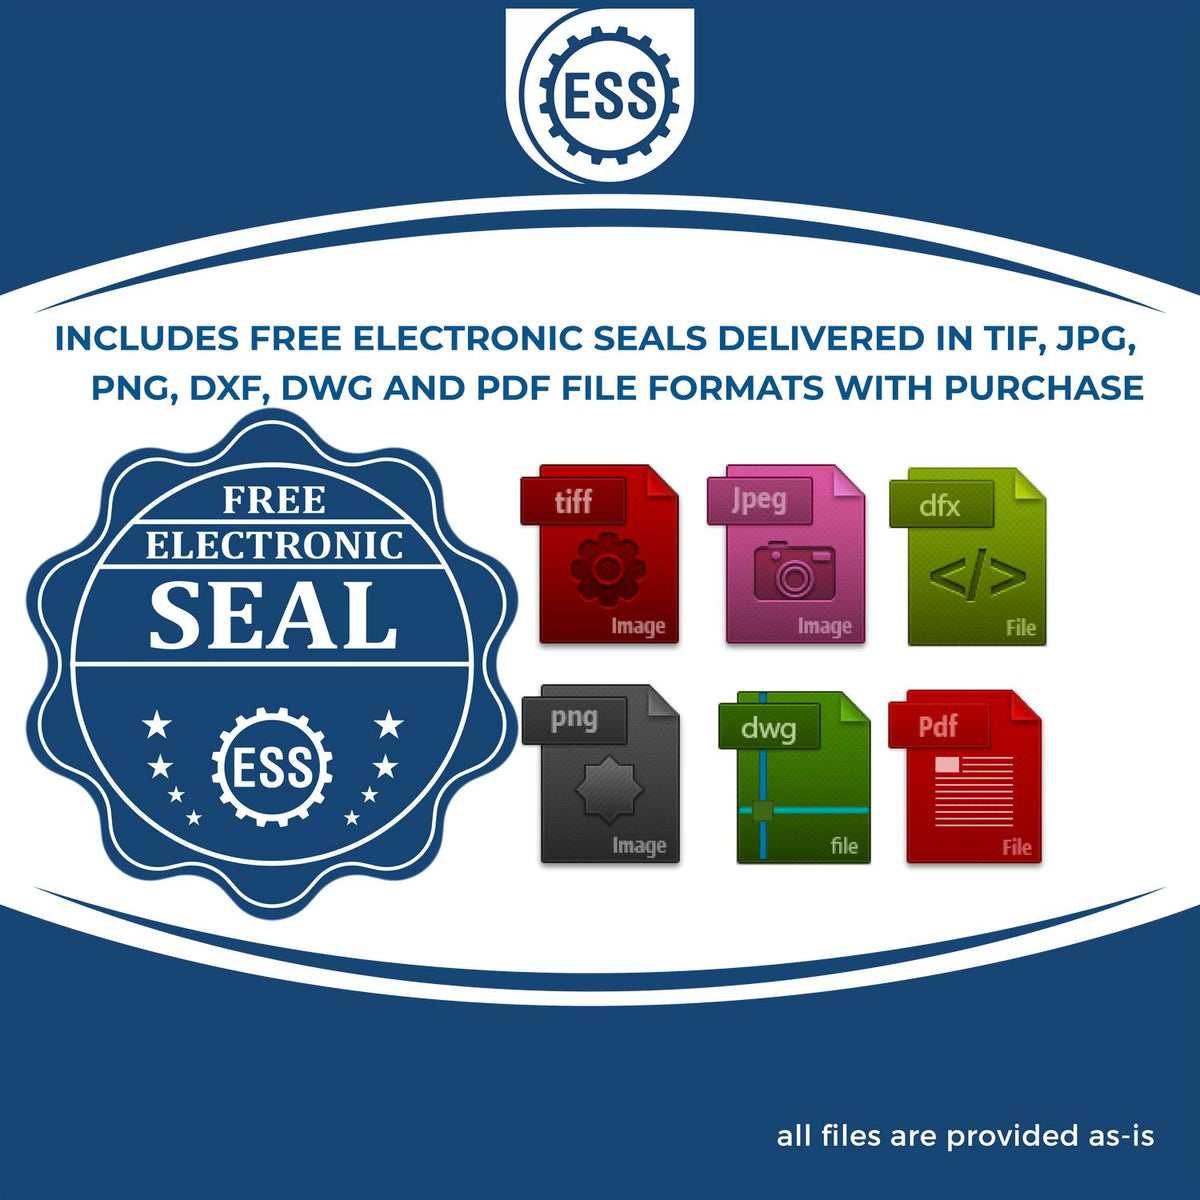 An infographic for the free electronic seal for the Gift New Hampshire Engineer Seal illustrating the different file type icons such as DXF, DWG, TIF, JPG and PNG.